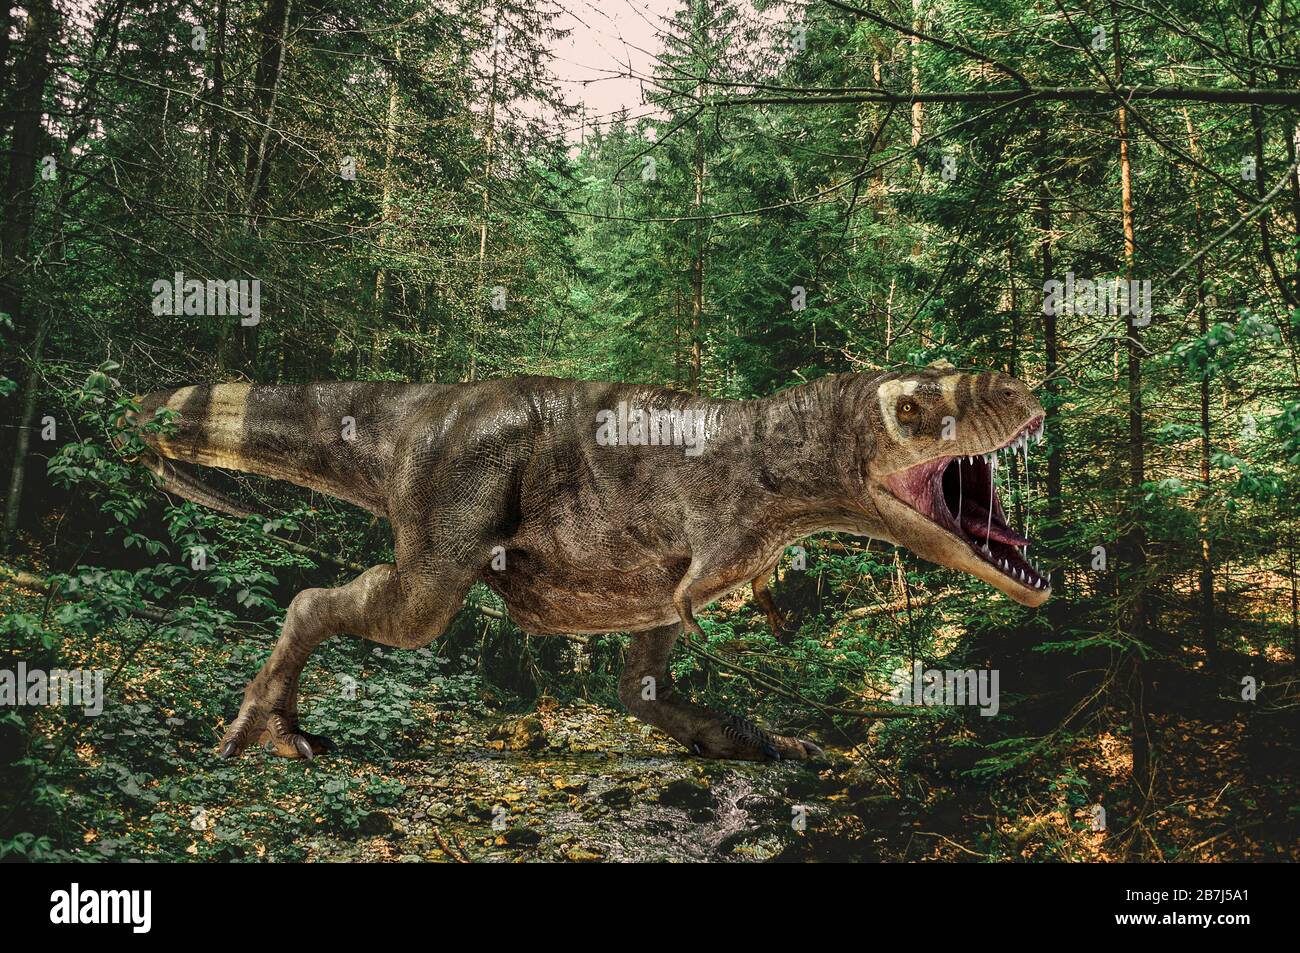 T-Rex dinosaur roaring in a coniferous forest. 3D photorealistic illustration. Stock Photo